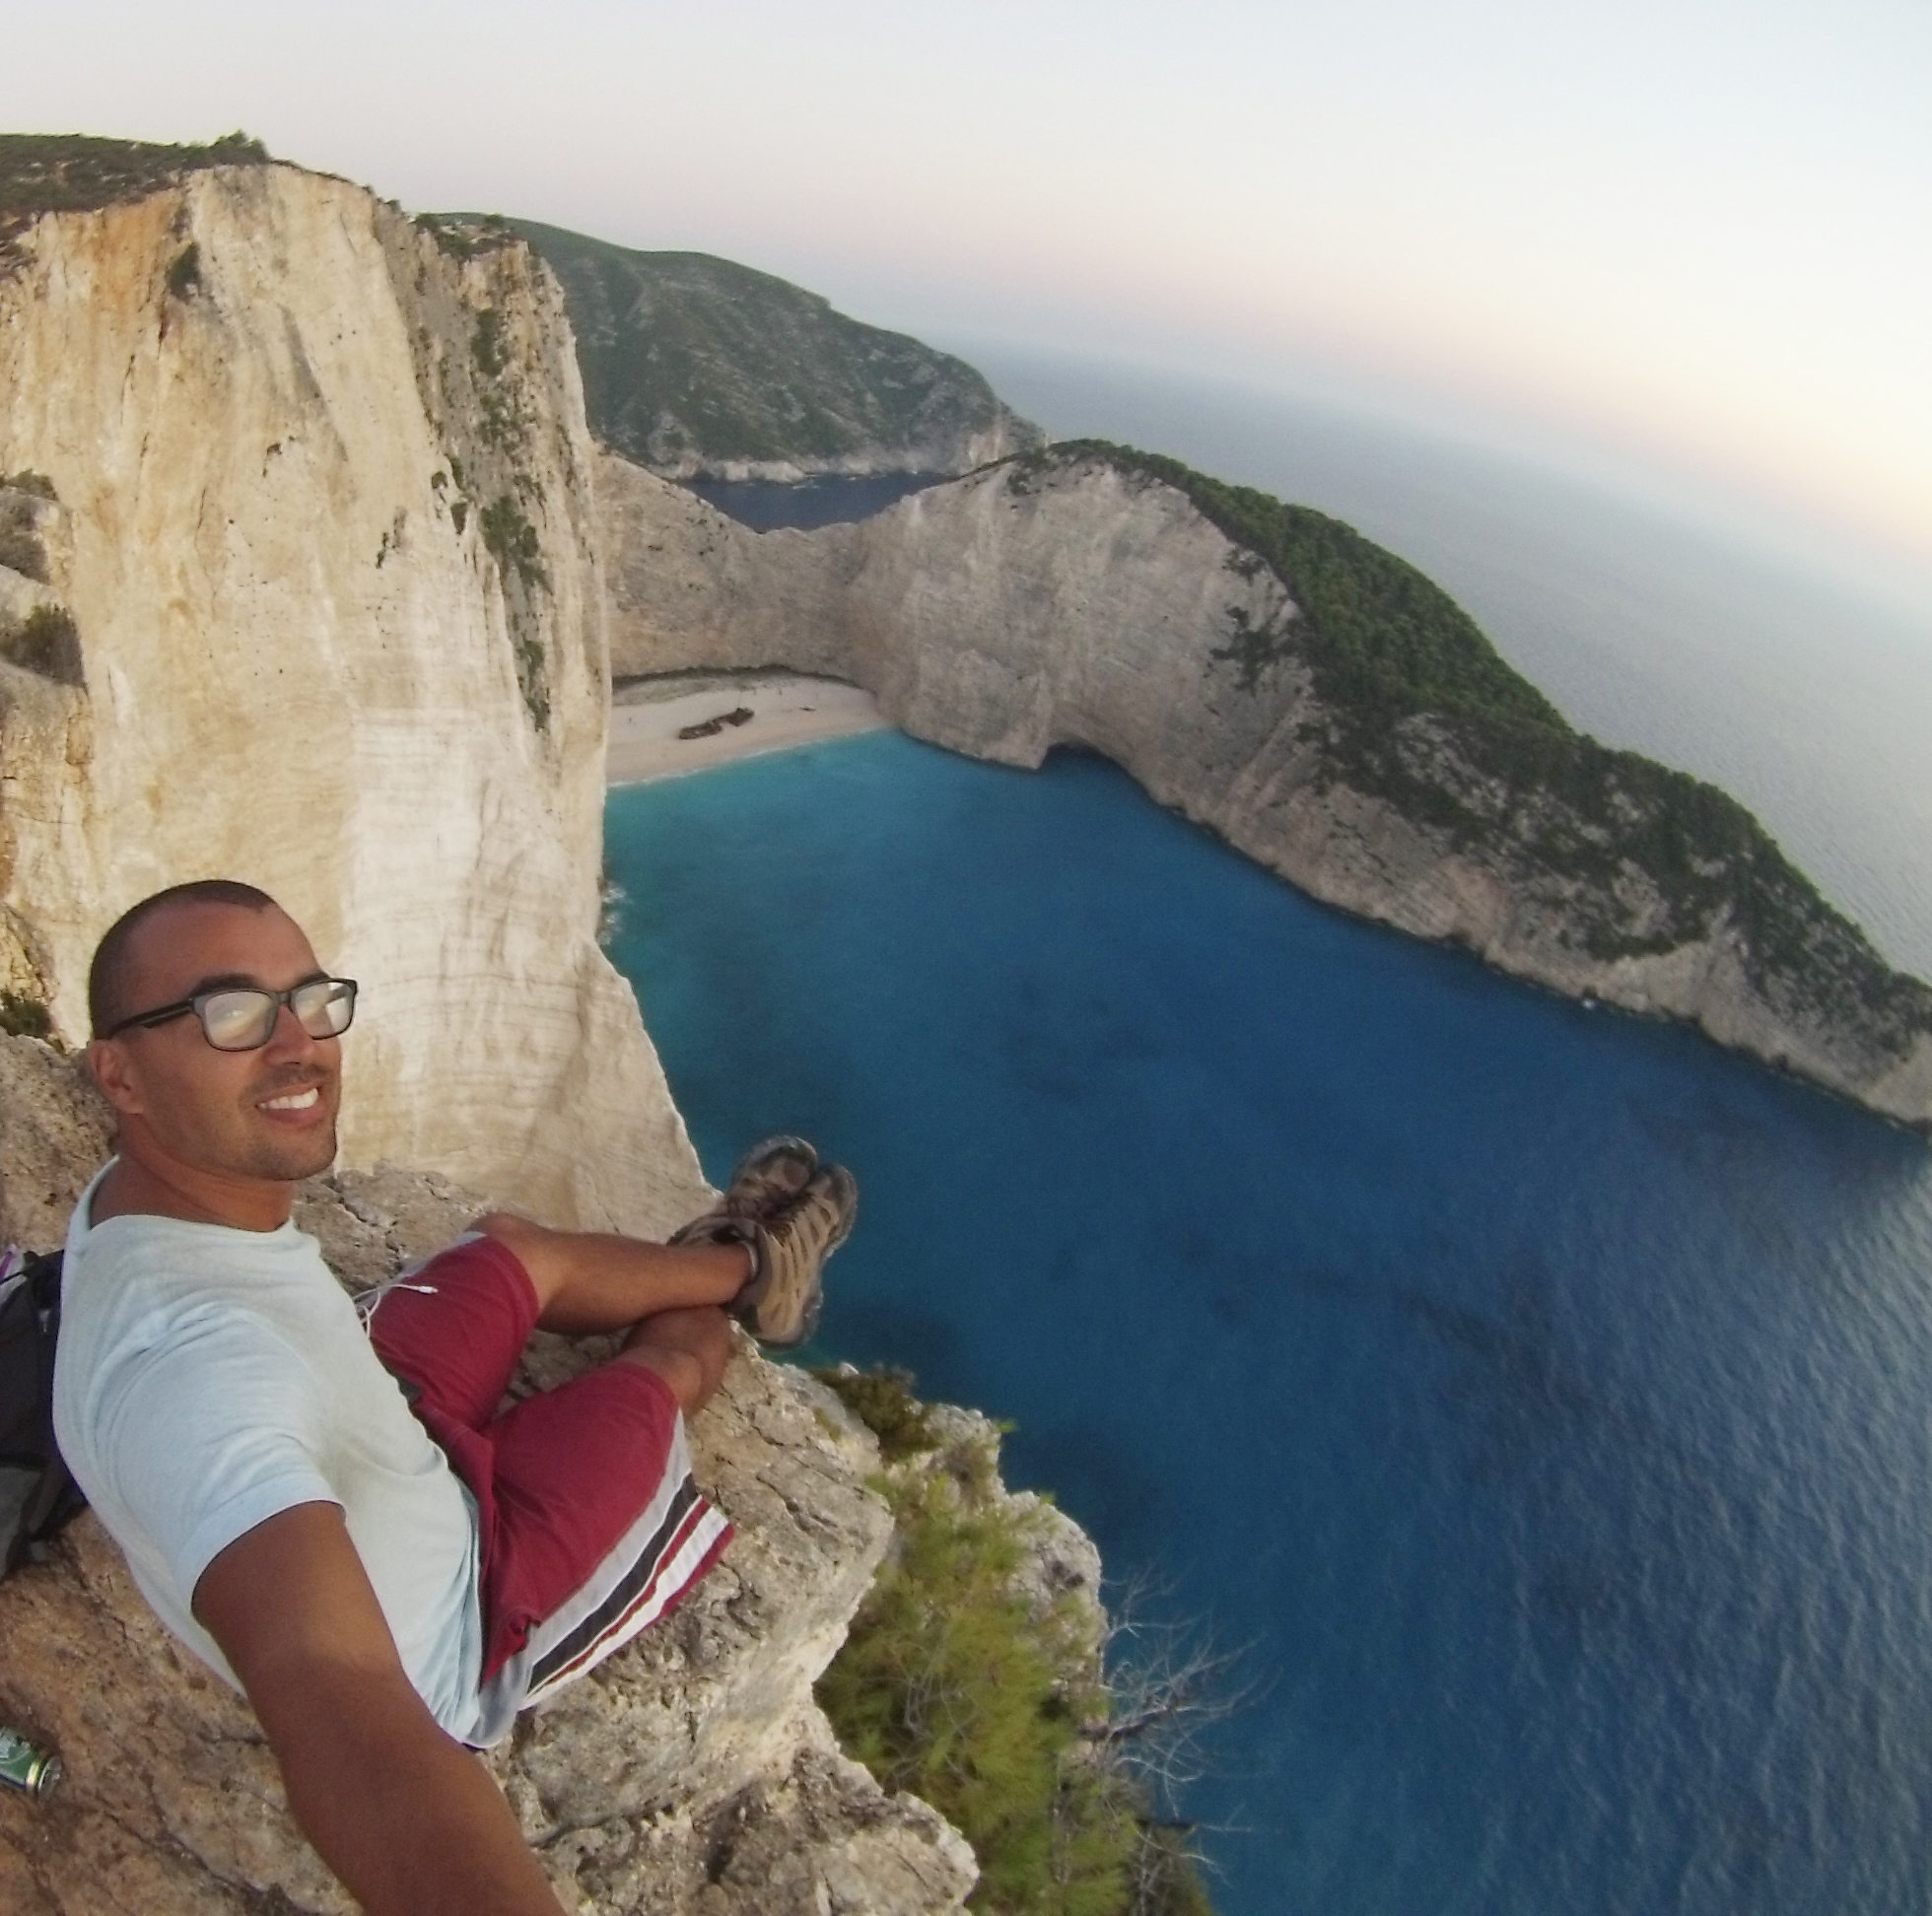 A joyful image of the user standing on the stunning Navagio Beach in Zakynthos, Greece. Photo above the turquoise waters and the iconic shipwreck nestled in a sandy cove surrounded by towering cliffs in this picturesque Greek paradise.